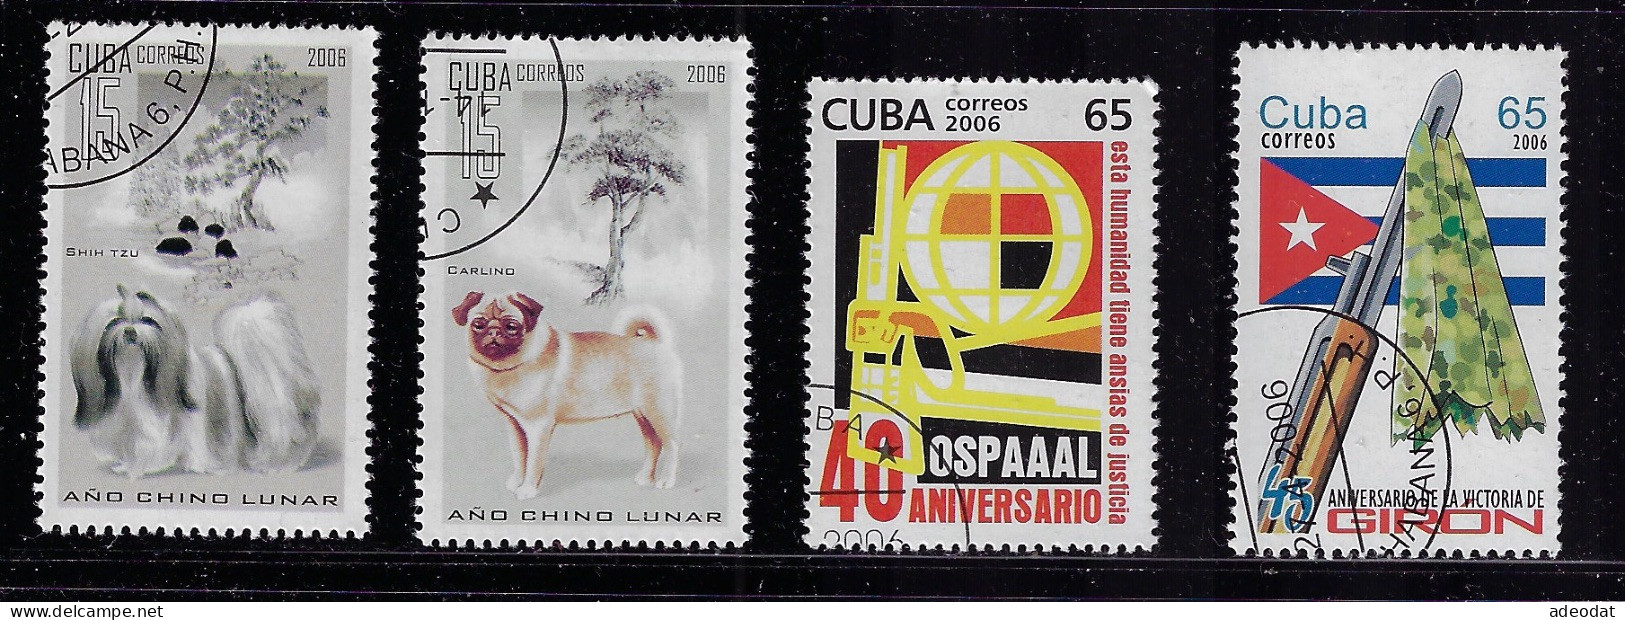 CUBA 2006 SCOTT 4558-4560,4569 CANCELLED - Used Stamps